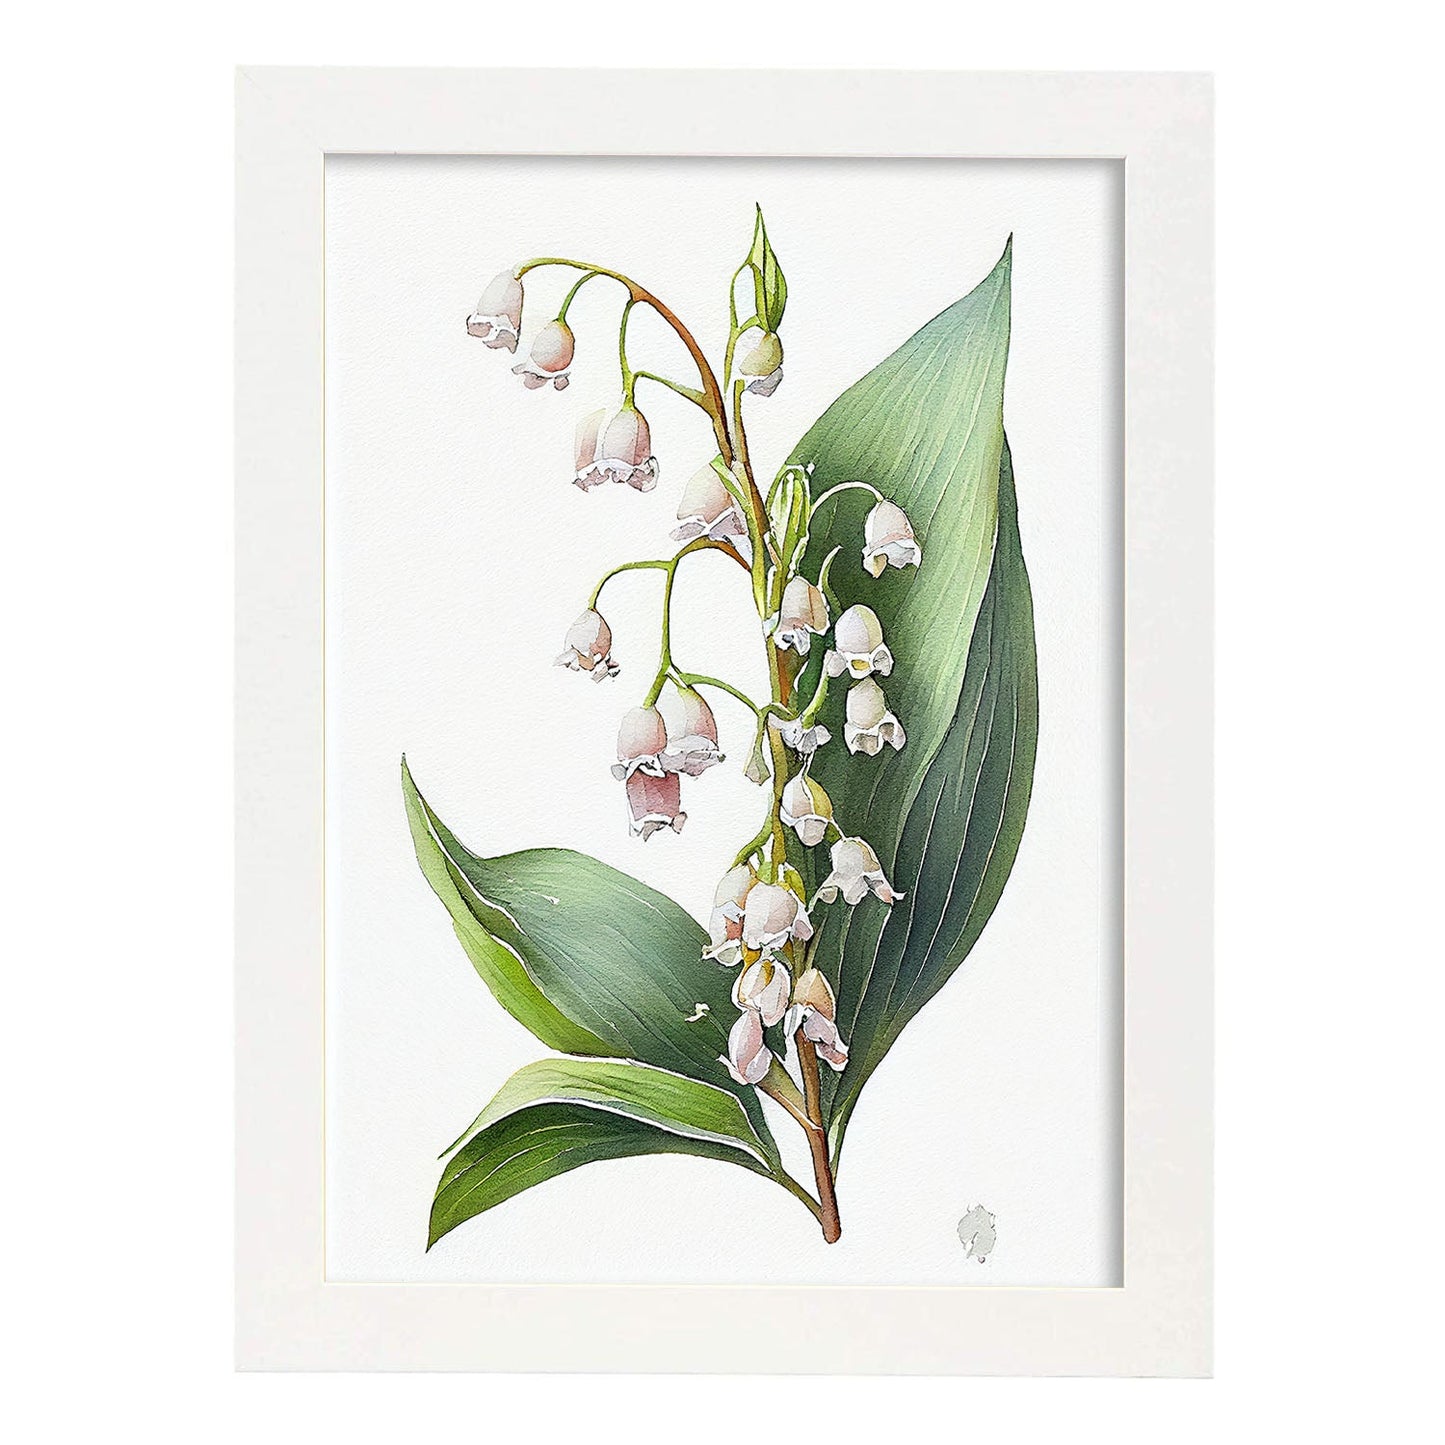 Nacnic watercolor minmal Lily of the Valley. Aesthetic Wall Art Prints for Bedroom or Living Room Design.-Artwork-Nacnic-A4-Marco Blanco-Nacnic Estudio SL